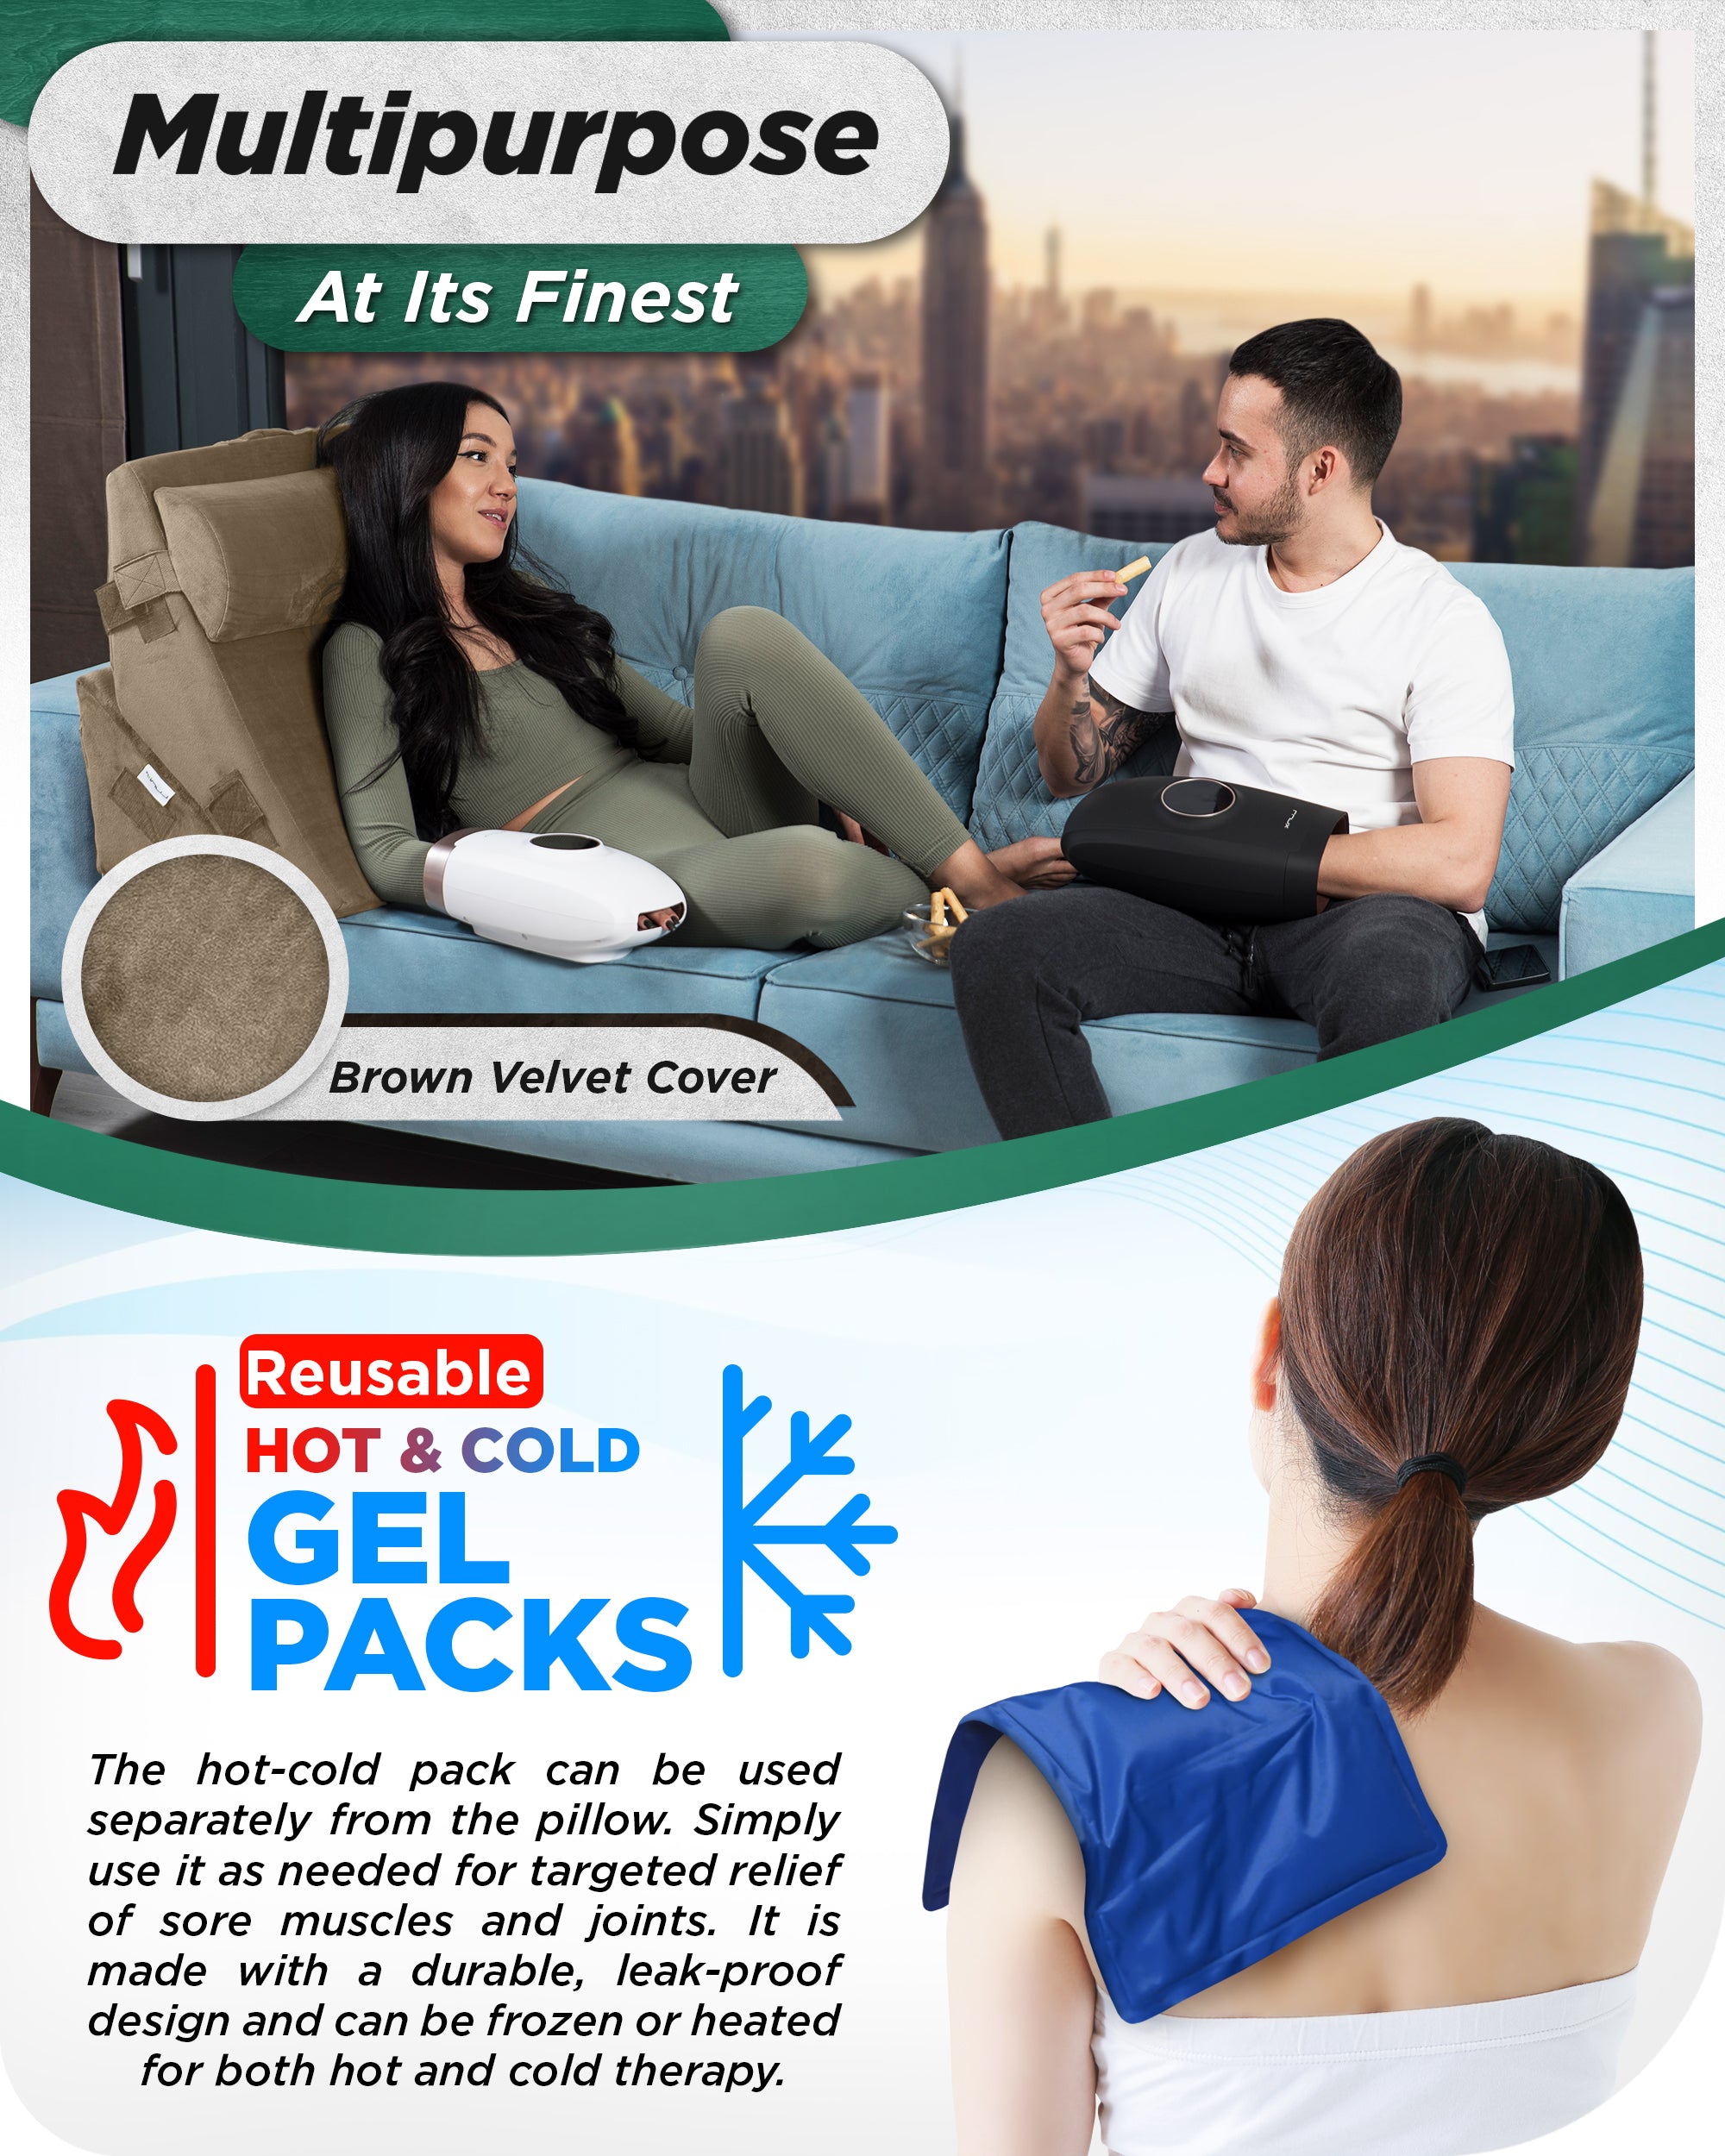 Heated Massage Seat Cushion, Hot & Cold Therapy